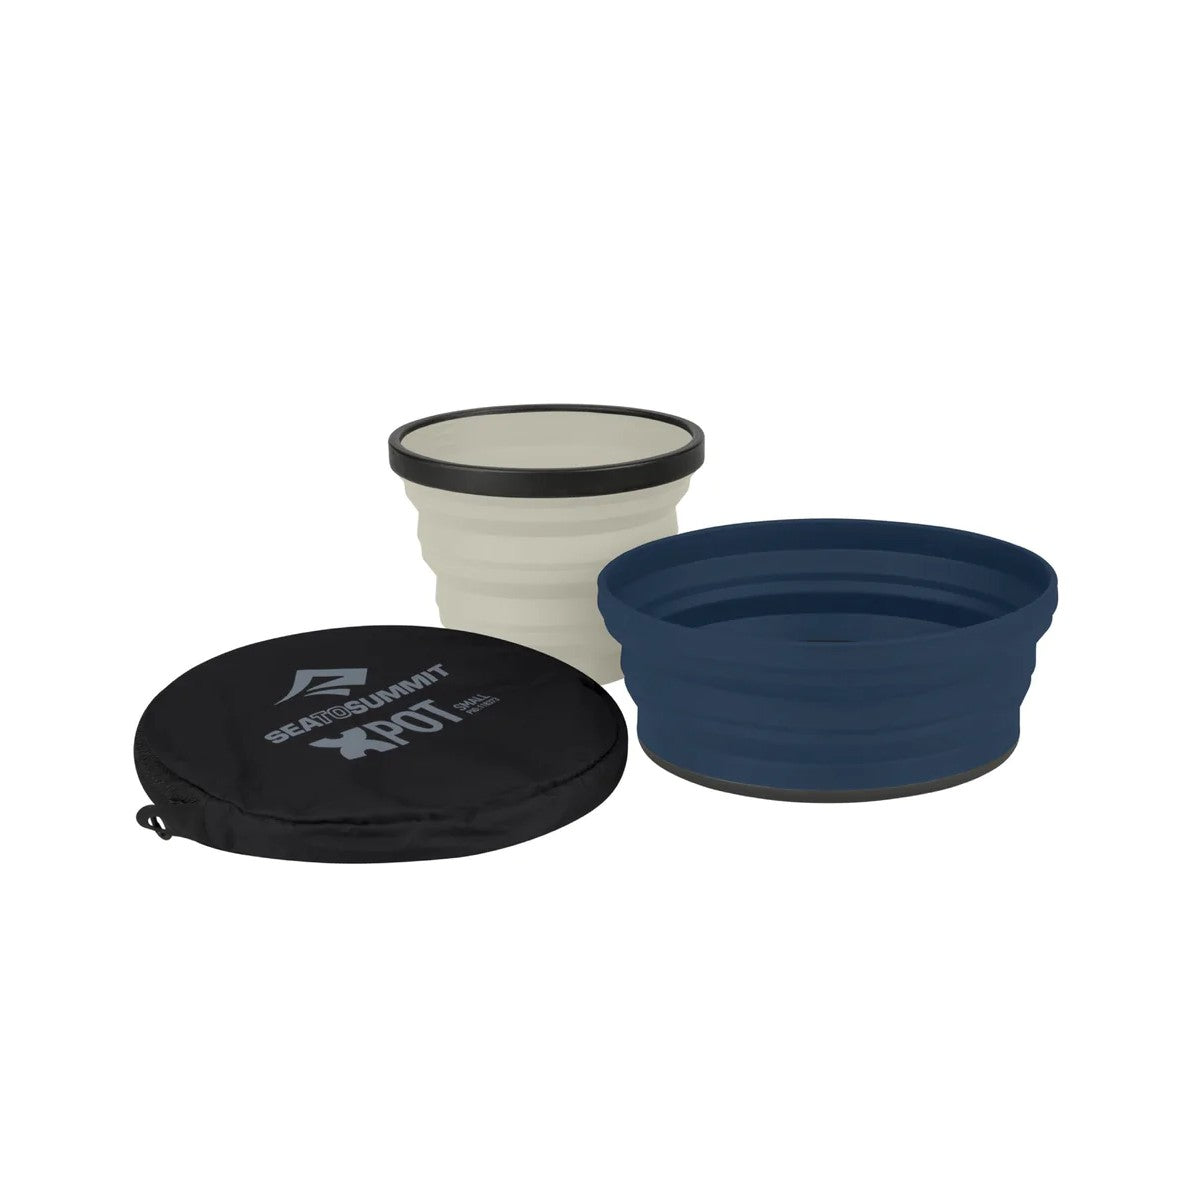 Sea to Summit X-Set 2-Piece Set (Plate & Cup)